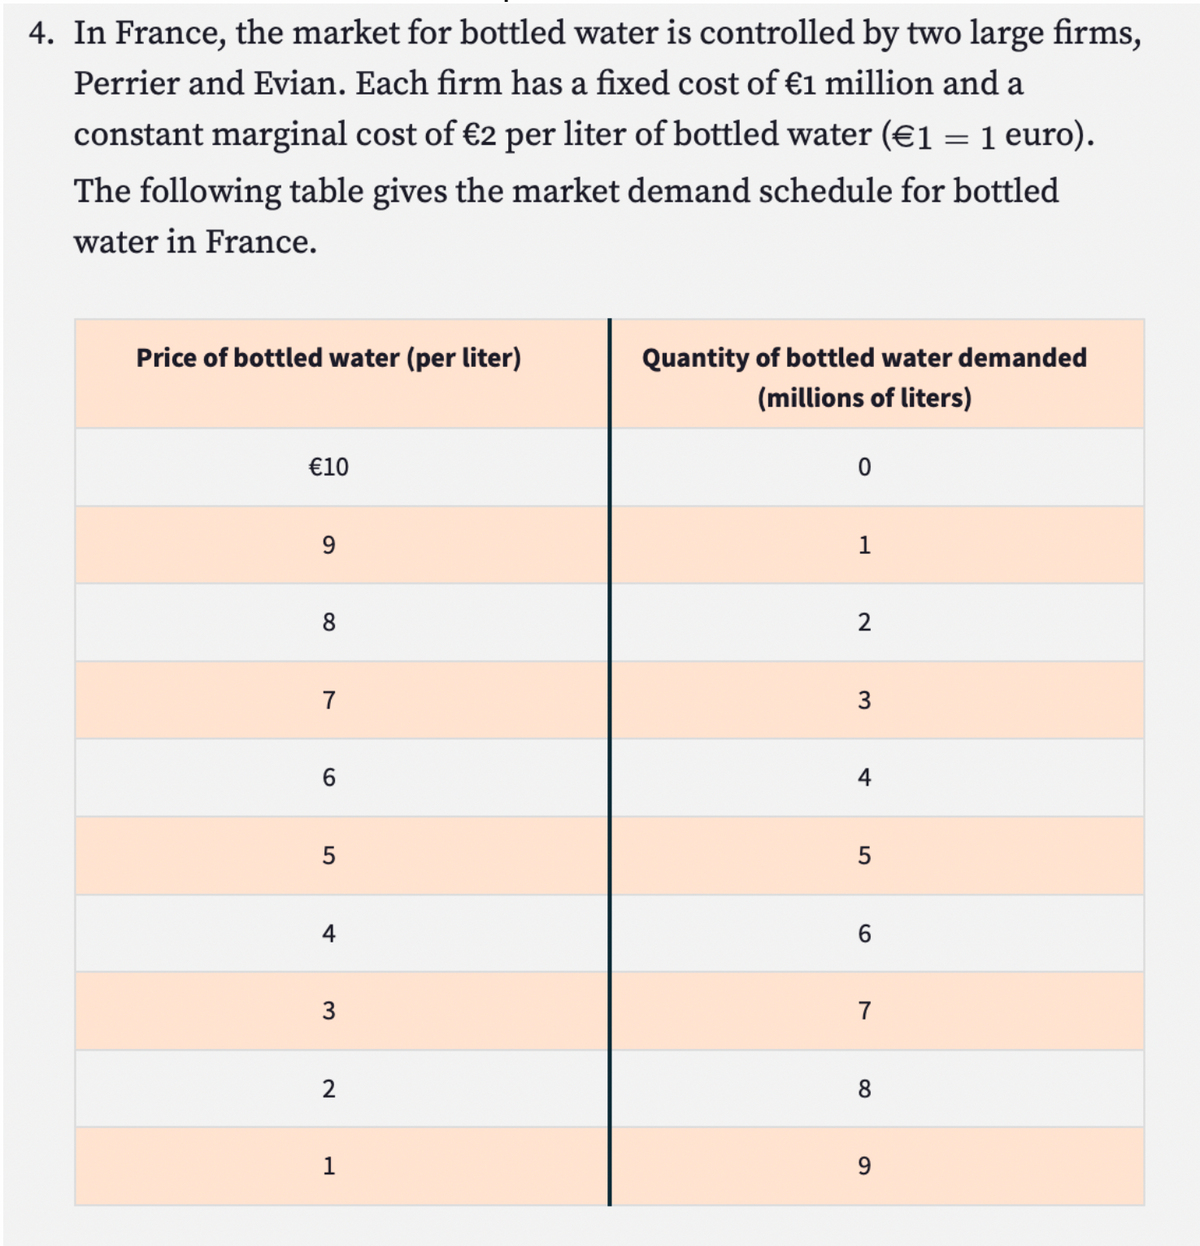 4. In France, the market for bottled water is controlled by two large firms,
Perrier and Evian. Each firm has a fixed cost of €1 million and a
constant marginal cost of €2 per liter of bottled water (€1 = 1 euro).
The following table gives the market demand schedule for bottled
water in France.
Price of bottled water (per liter)
€10
9
8
7
6
5
4
3
2
1
Quantity of bottled water demanded
(millions of liters)
0
1
2
3
5
6
7
8
9